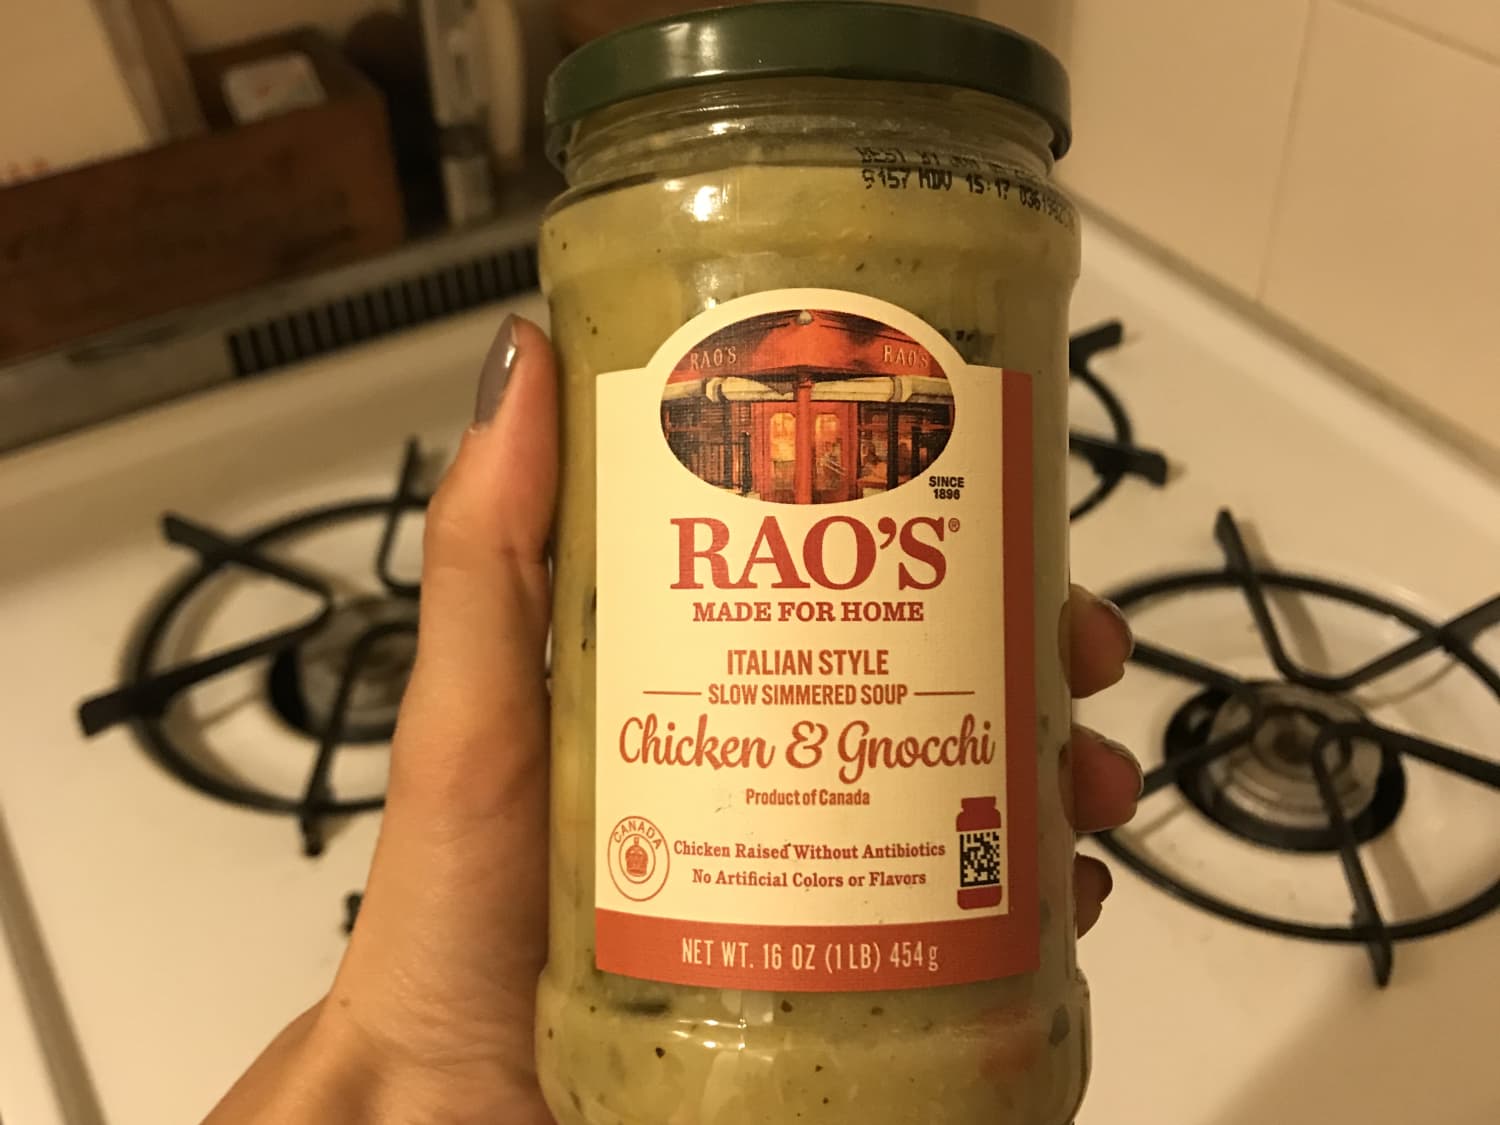 Rao's soup recalled for having wrong contents